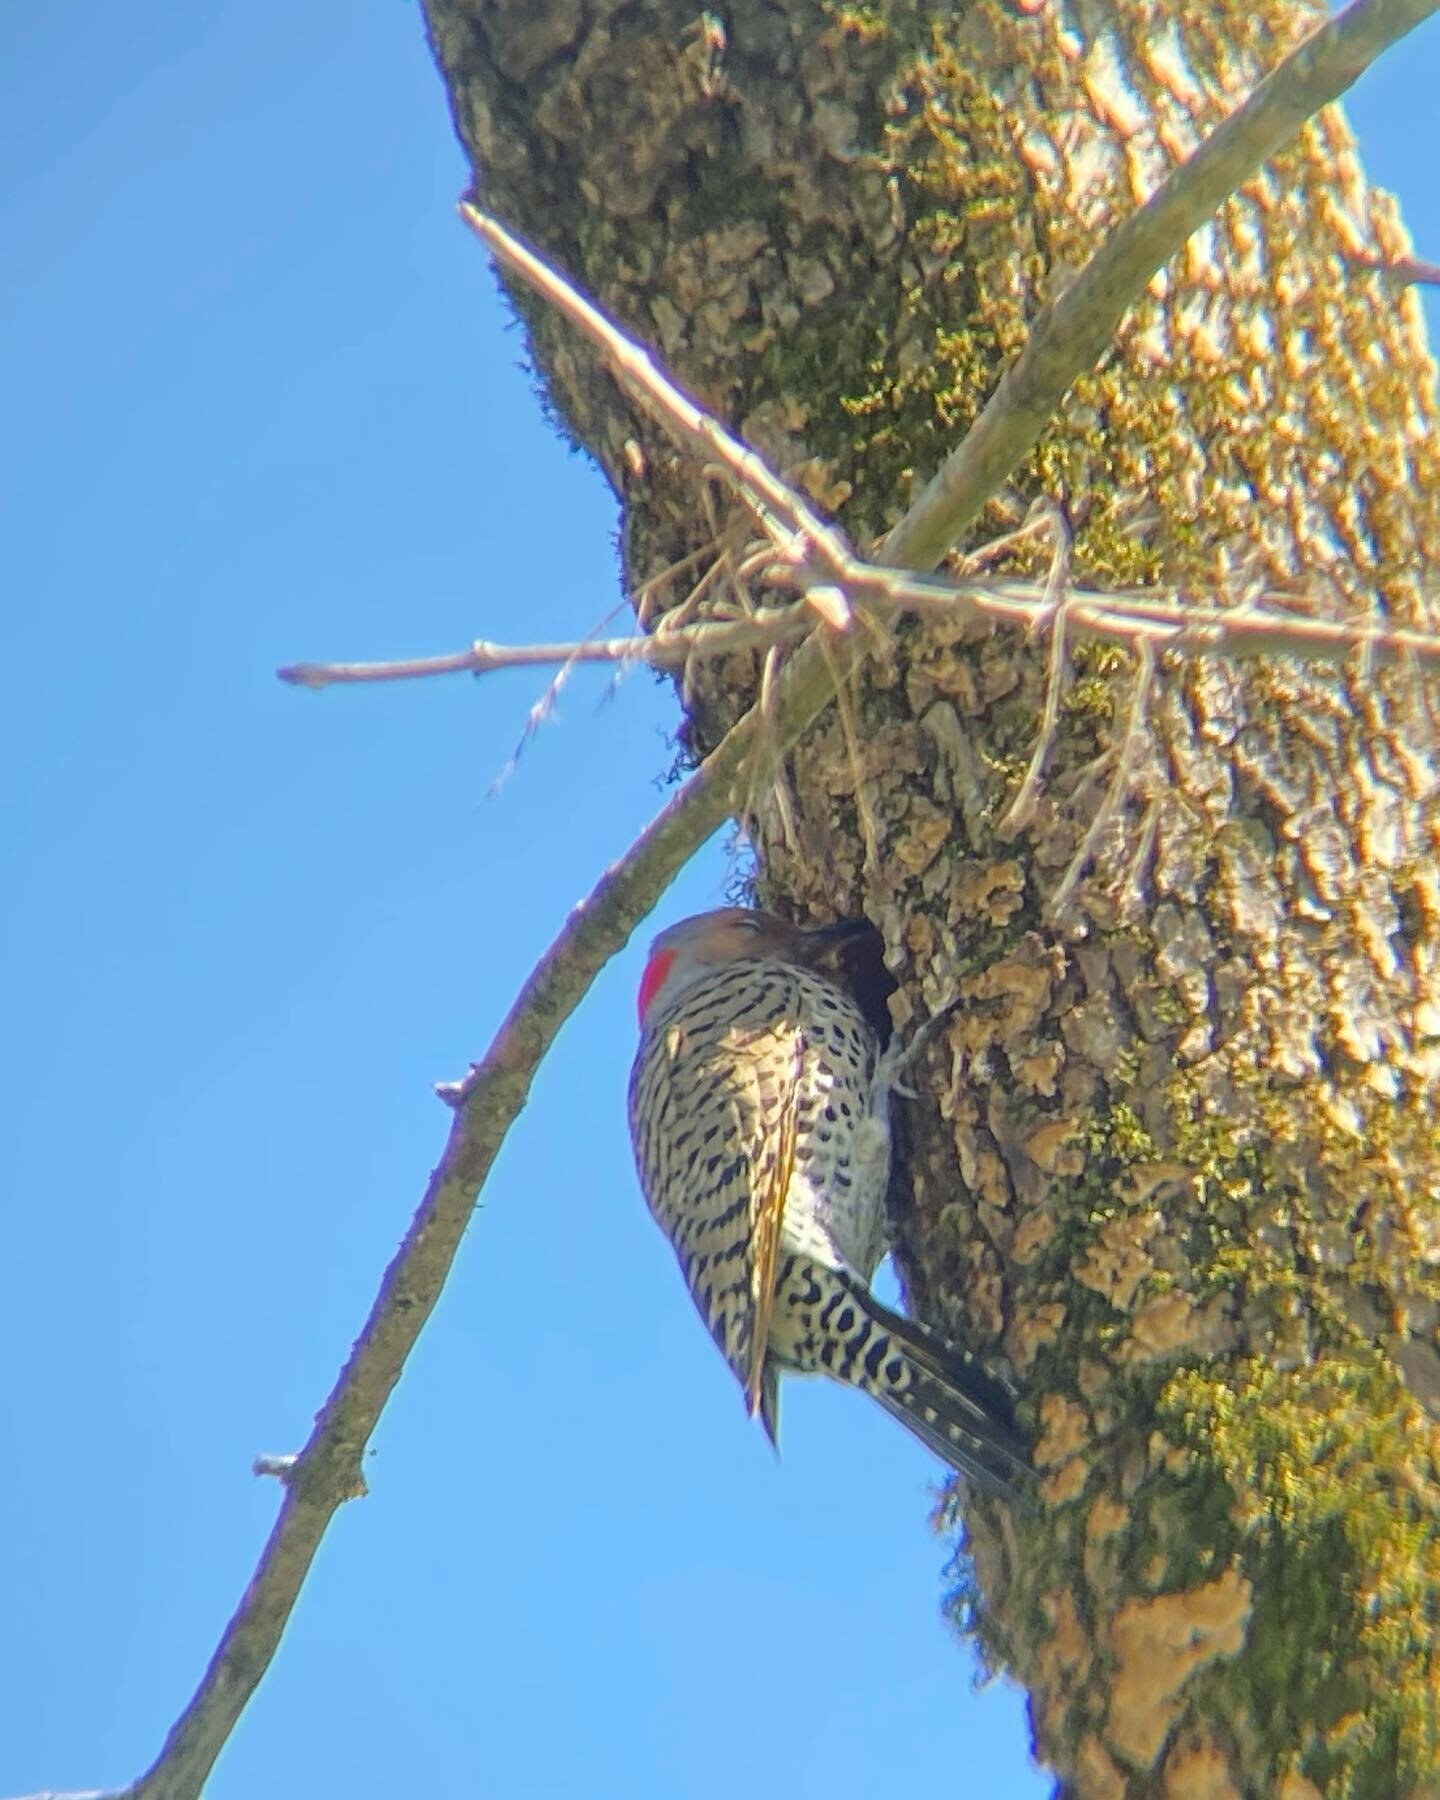 Came to see the black crowned night herons but the highlight was the #yellowhammerwoodpecker &mdash;I&rsquo;ve been wanting to see one of these for months. #birdlist #birdwatching @alaudubon #birdnerd 🐦🤓